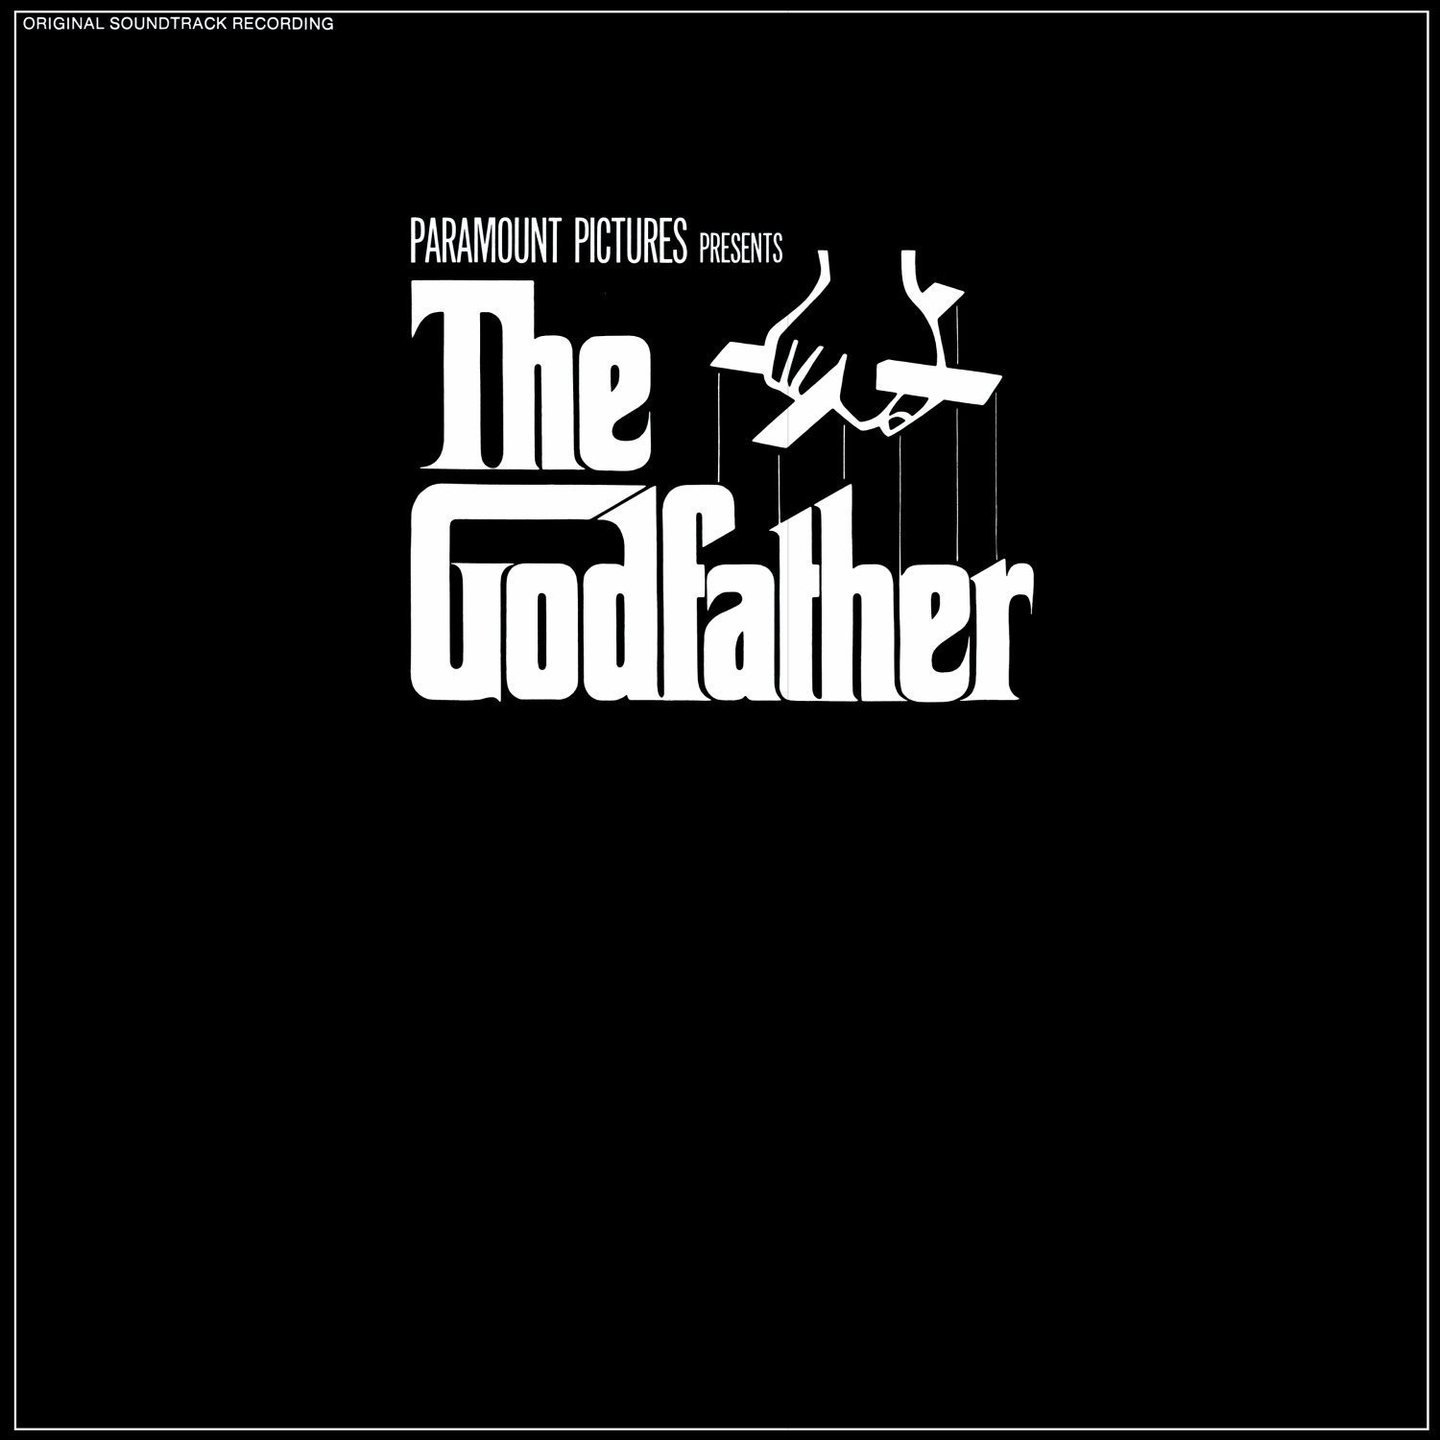 NINO ROTA - The Godfather Music From The Original Motion Picture Soundtrack LP 180g